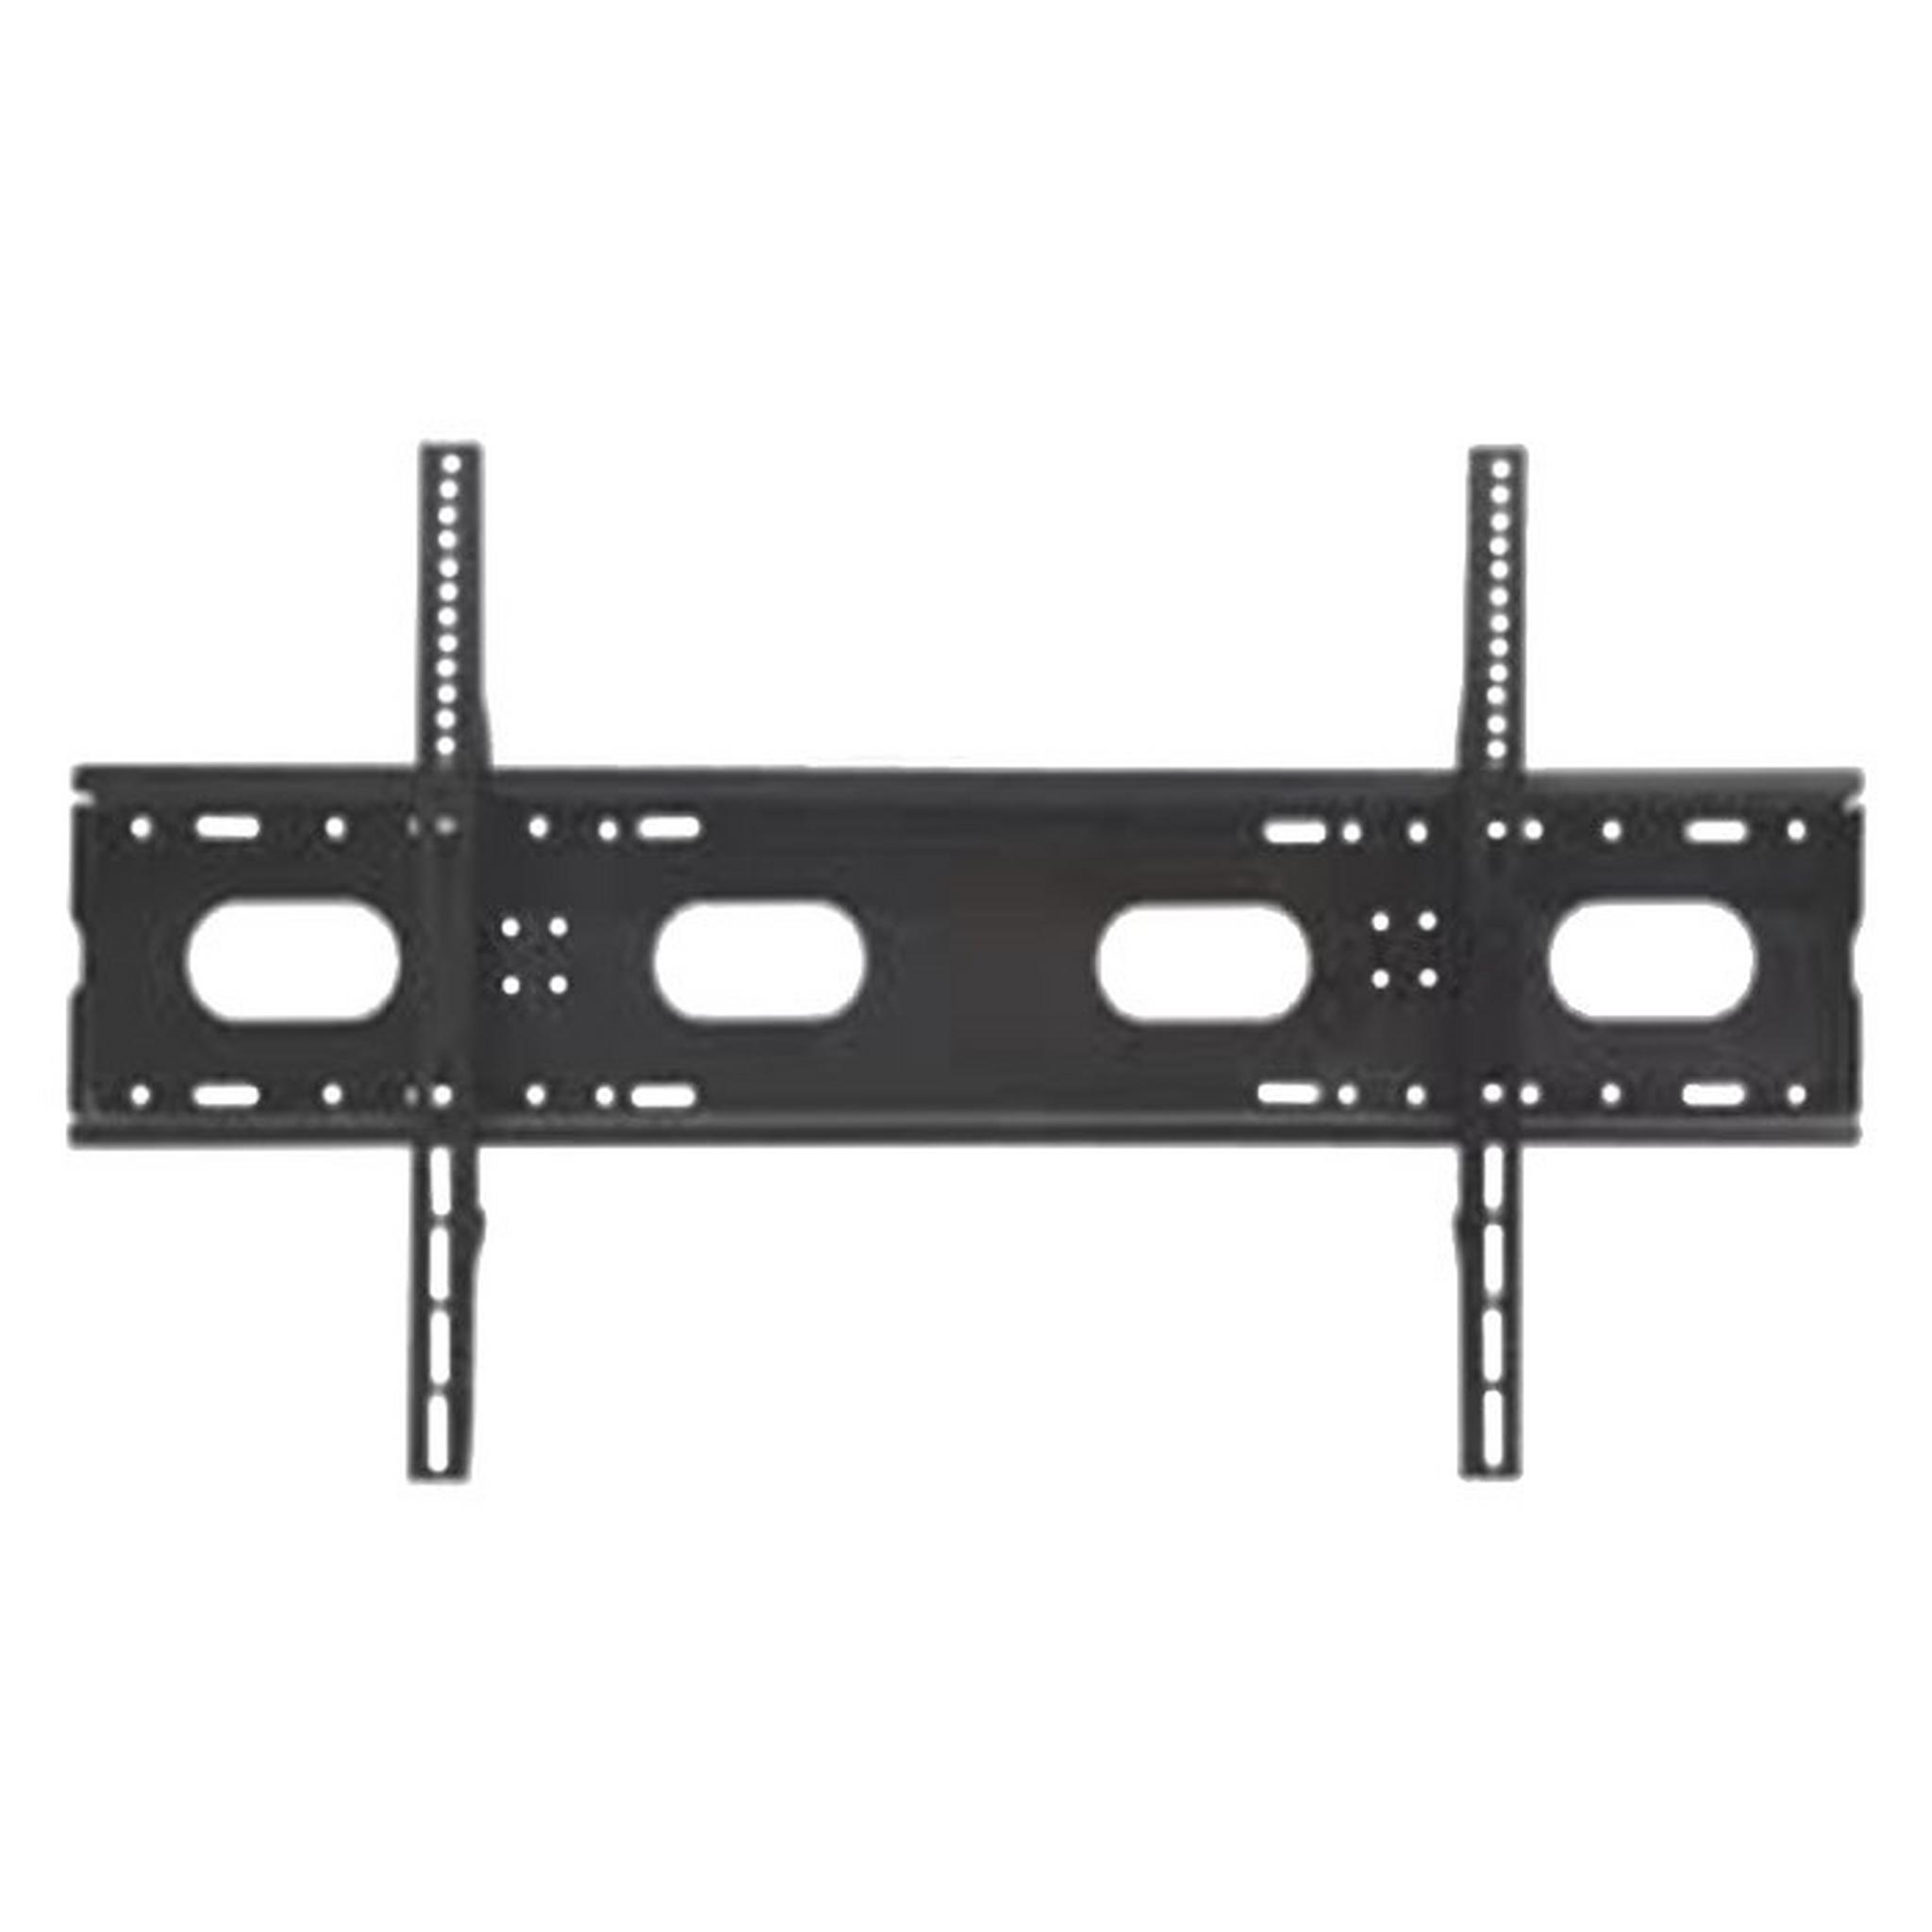 Emdico Fixed Wall Bracket for 42 to 120 inch TVs V-120